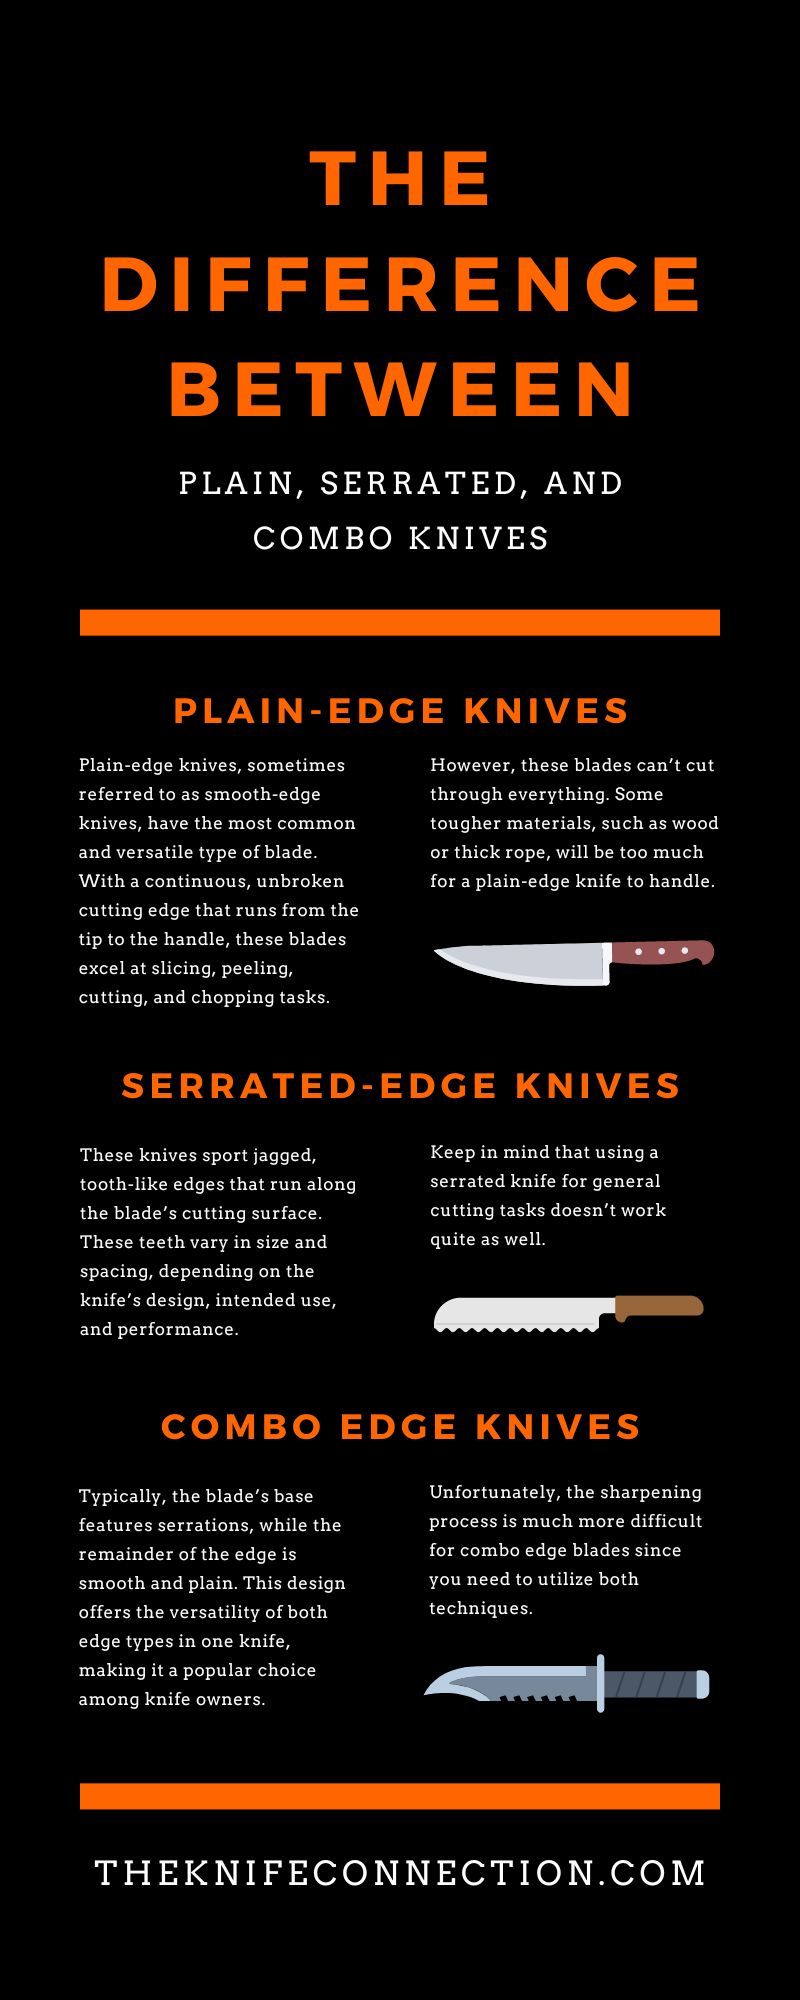 The Difference Between Plain, Serrated, and Combo Knives